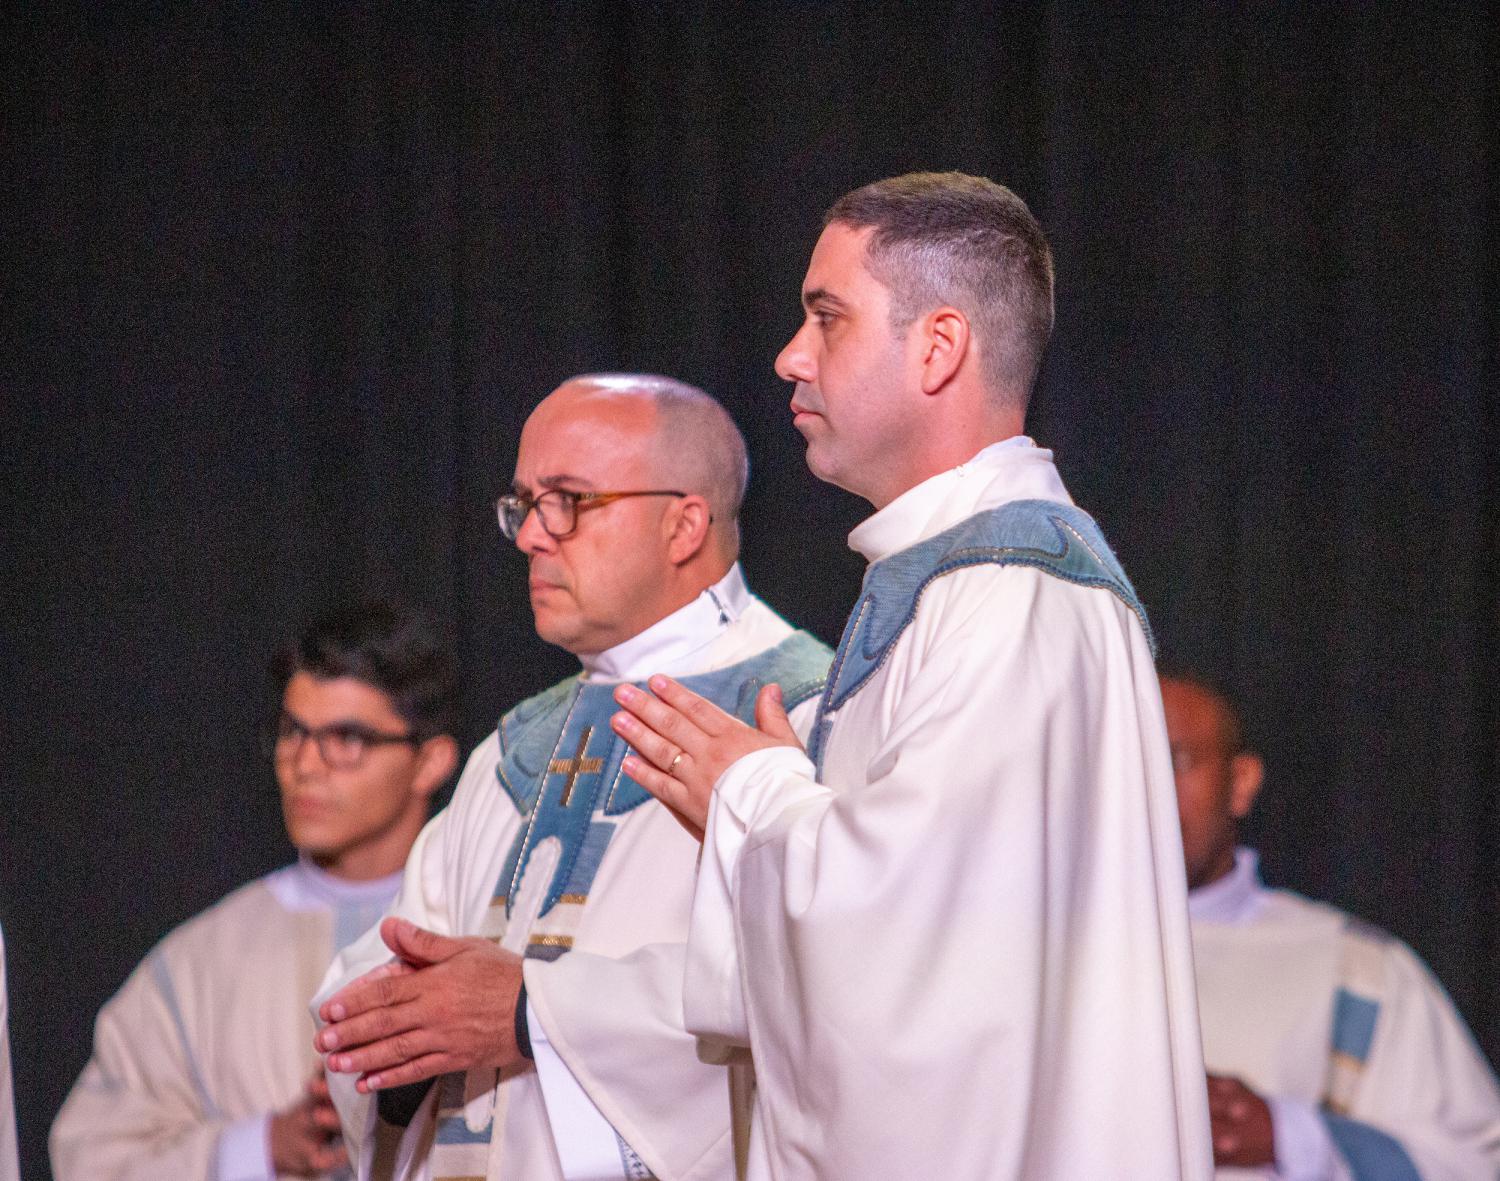 ADOM :: 8 new priests ordained for Miami